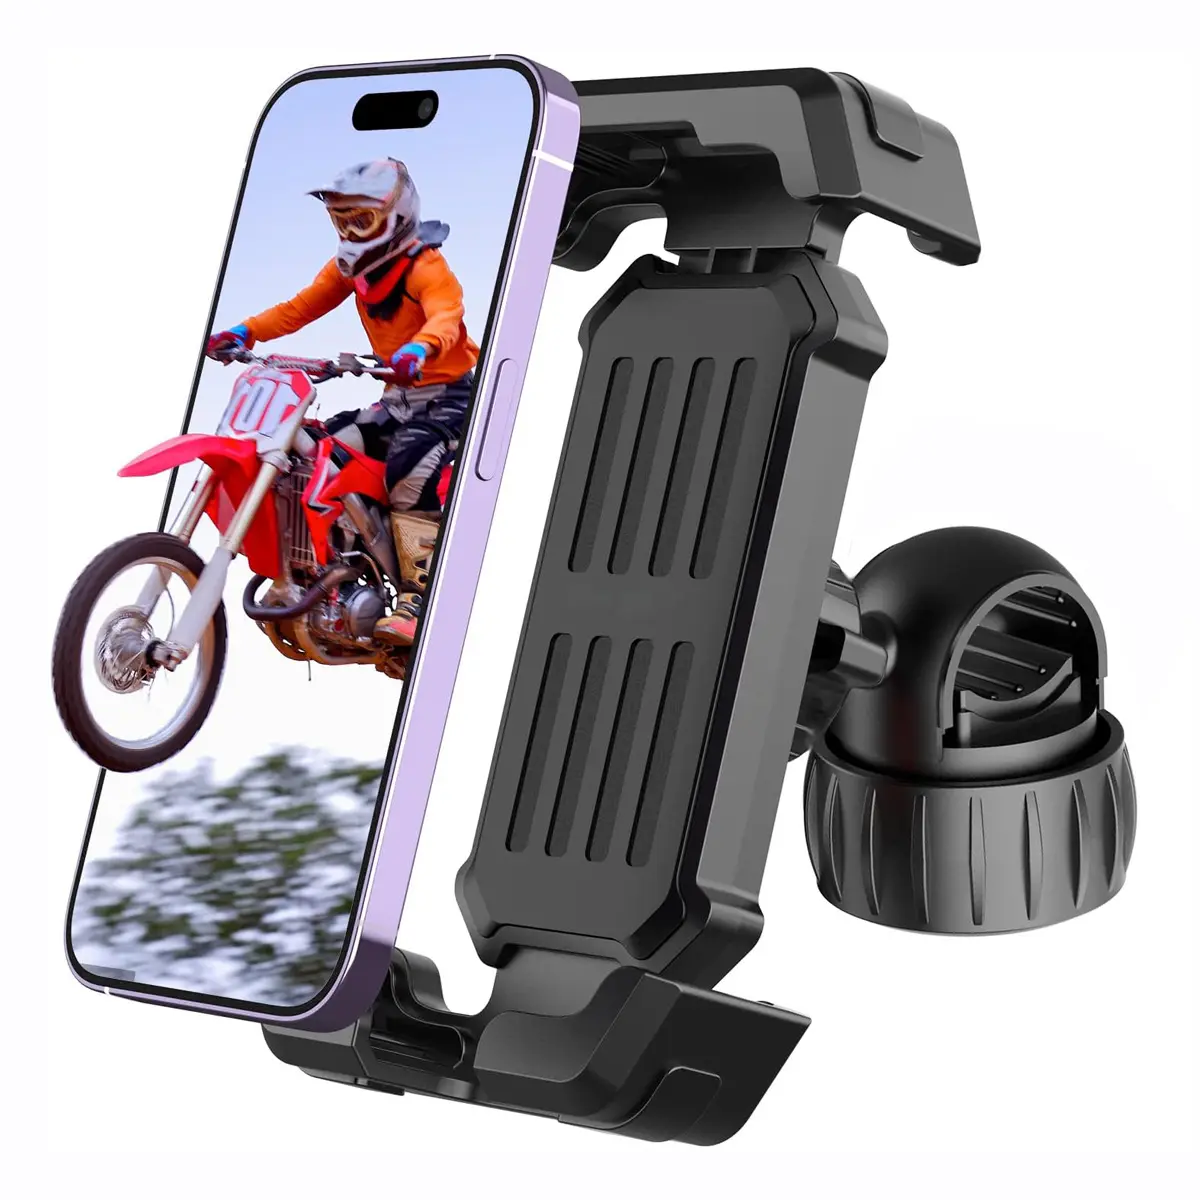 Hold The Phone Without Falling Aluminum Alloy Material Bicycle Motorcycle Cell Phone Holder